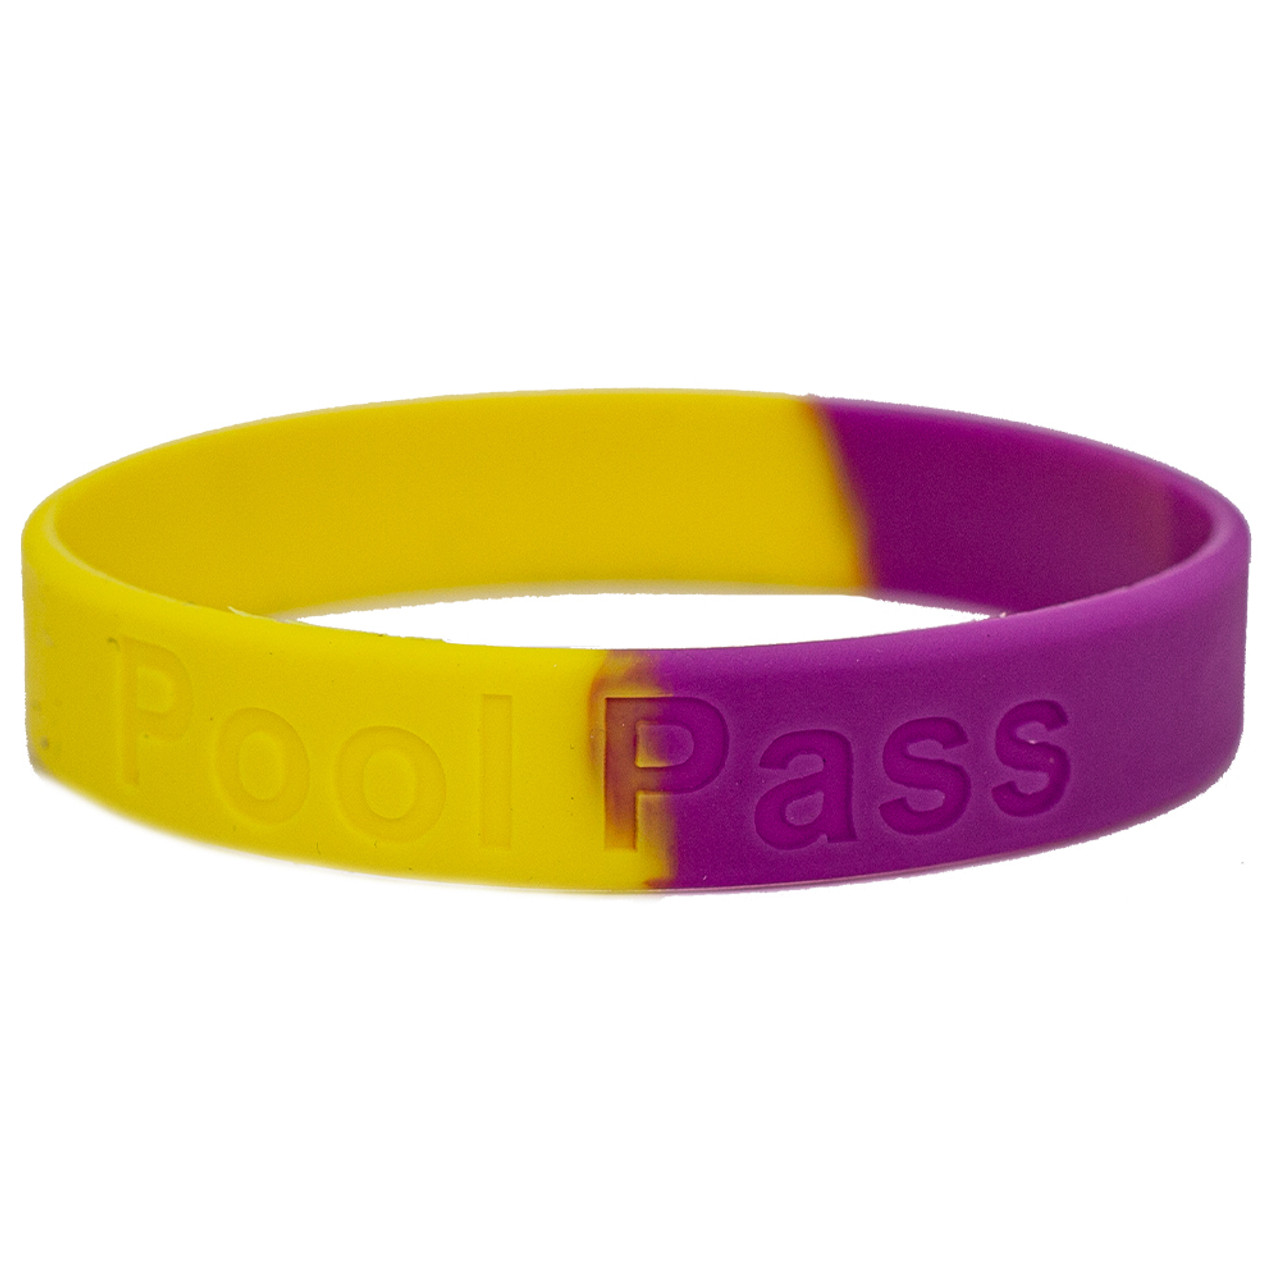 Adult Silicone Pool Pass (Purple/Yellow)